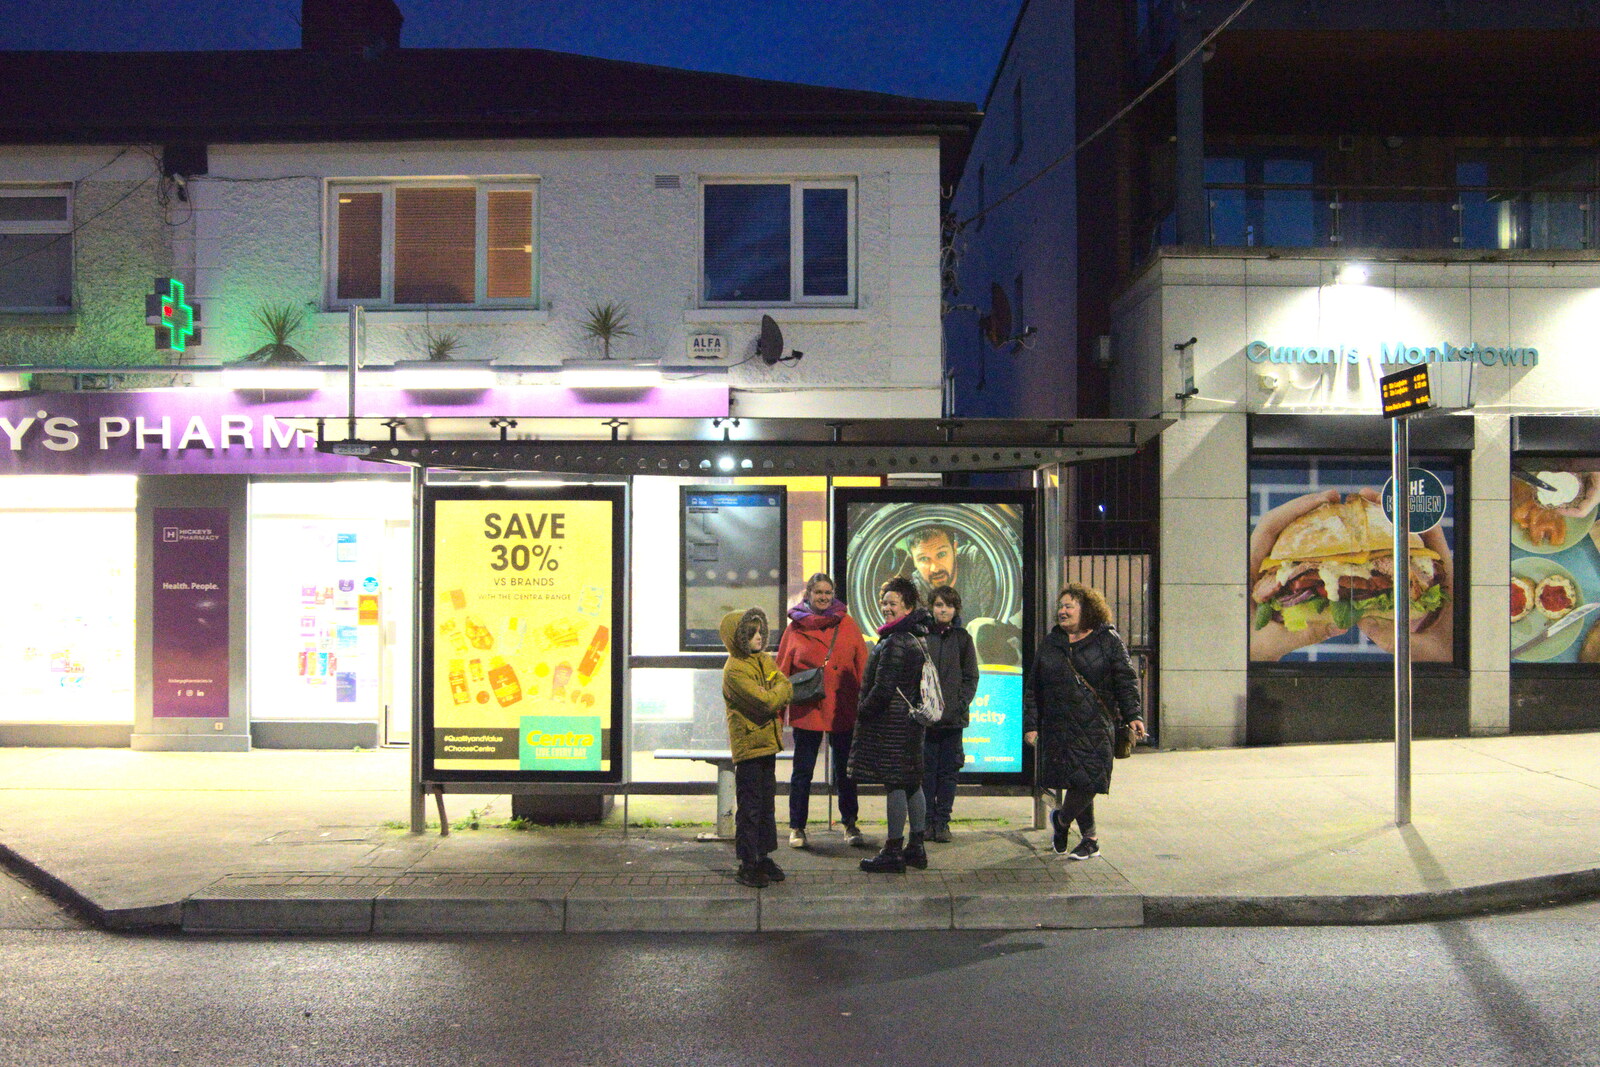 Blackrock North and Newgrange, County Louth, Ireland - 16th February 2023: We wait at the bus stop on Monkstown Farm 